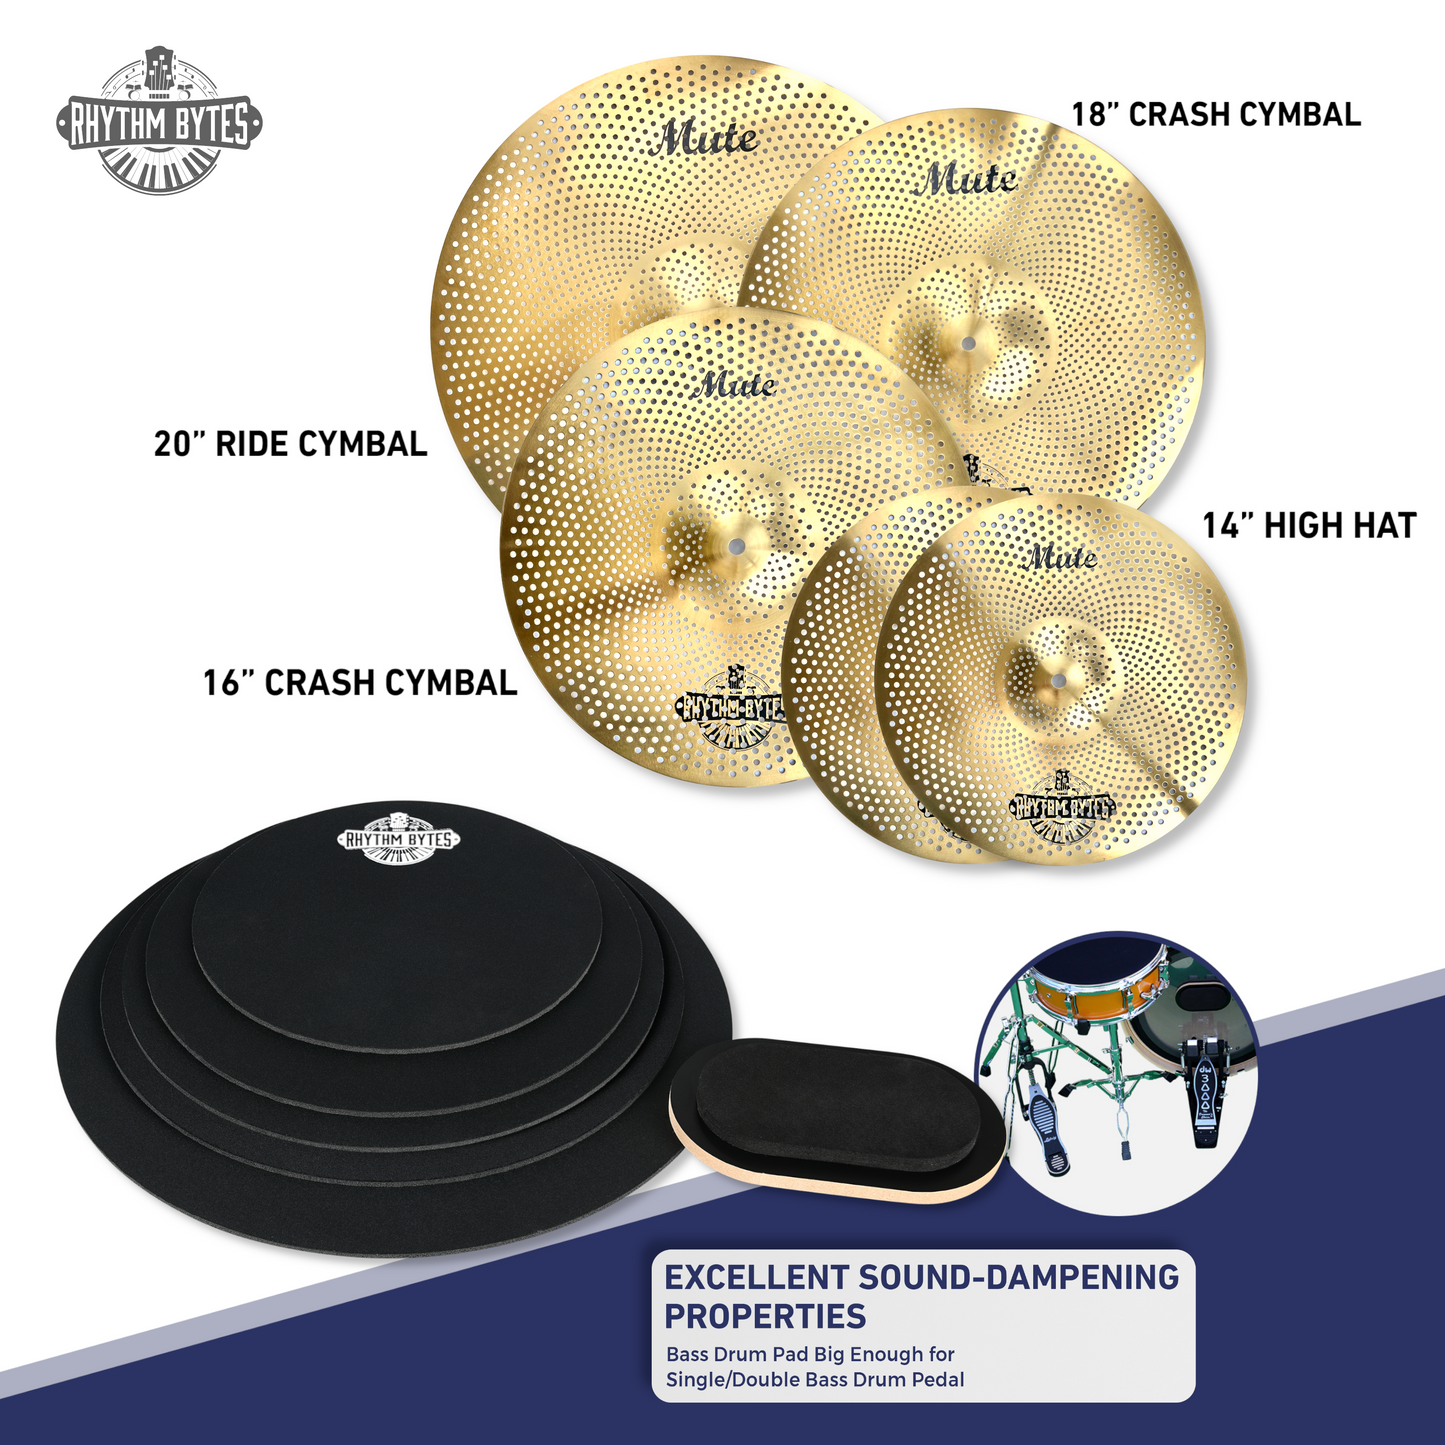 Low Volume Cymbal Pack with Drum Mute Pads, Complete 5pcs Mute Cymbal Set & 6pcs Drum Dampeners, Quiet Cymbals 14"/16"/18"/20" | Drum Mutes 10"/12"/13"/14"/16", 1 Bass Drum Mute Pad, Free Cymbal Bag